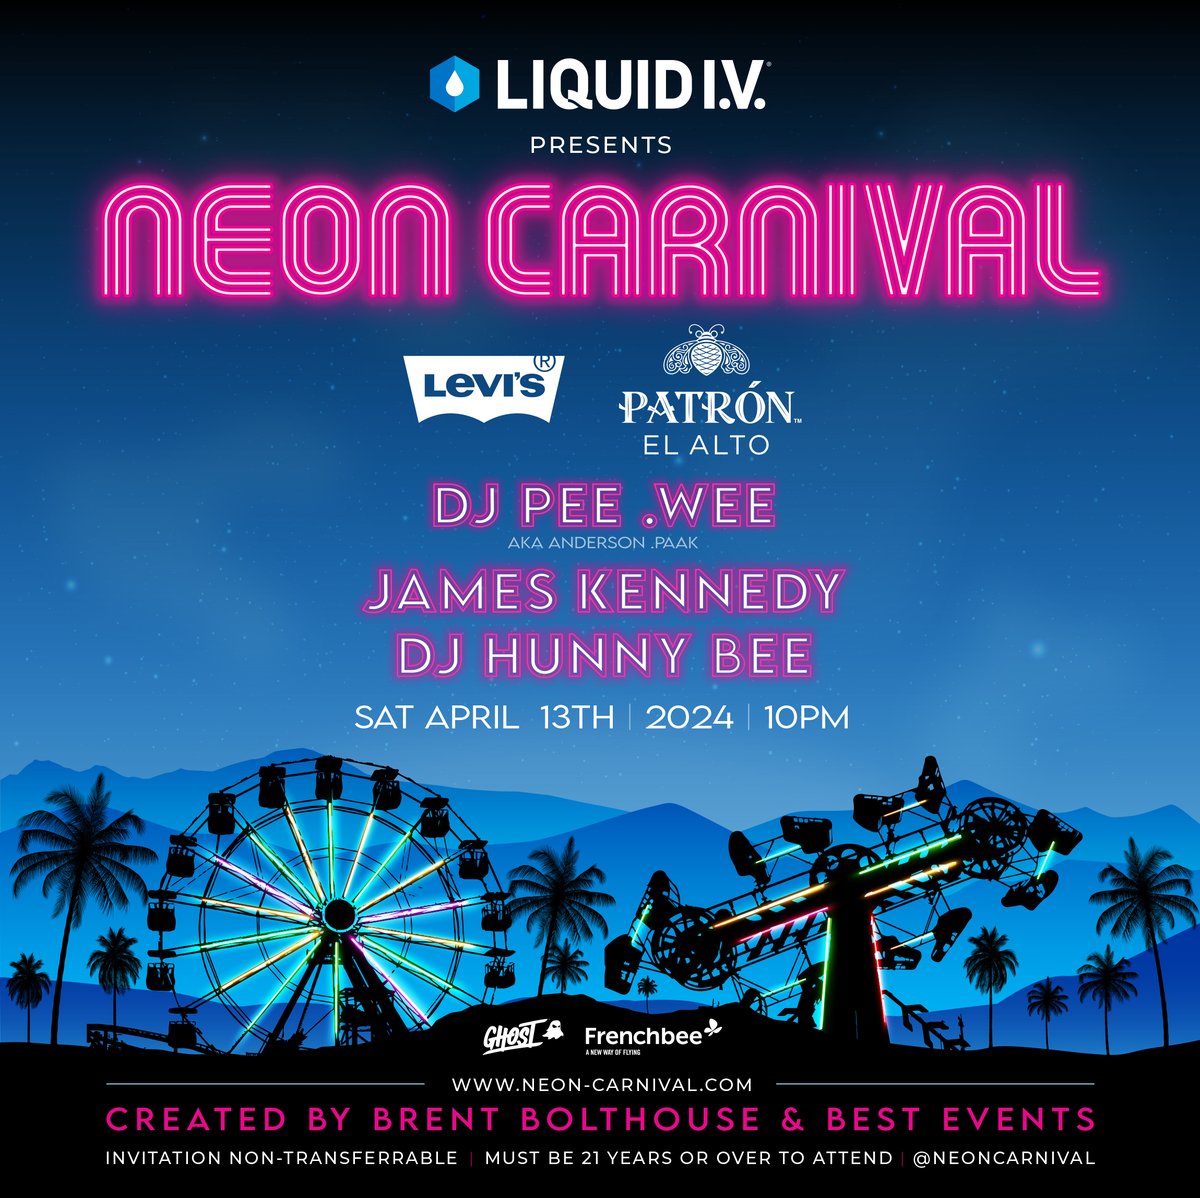 Who's going to Coachella?! @Apecoin is a sponsor of the 13th annual @Neon_Carnival, which will take place on Saturday, April 13th, 2024 in the Coachella Valley desert from 10PM to 4AM. The coveted invite-only party has always been known for its exclusivity, with a guest list of…